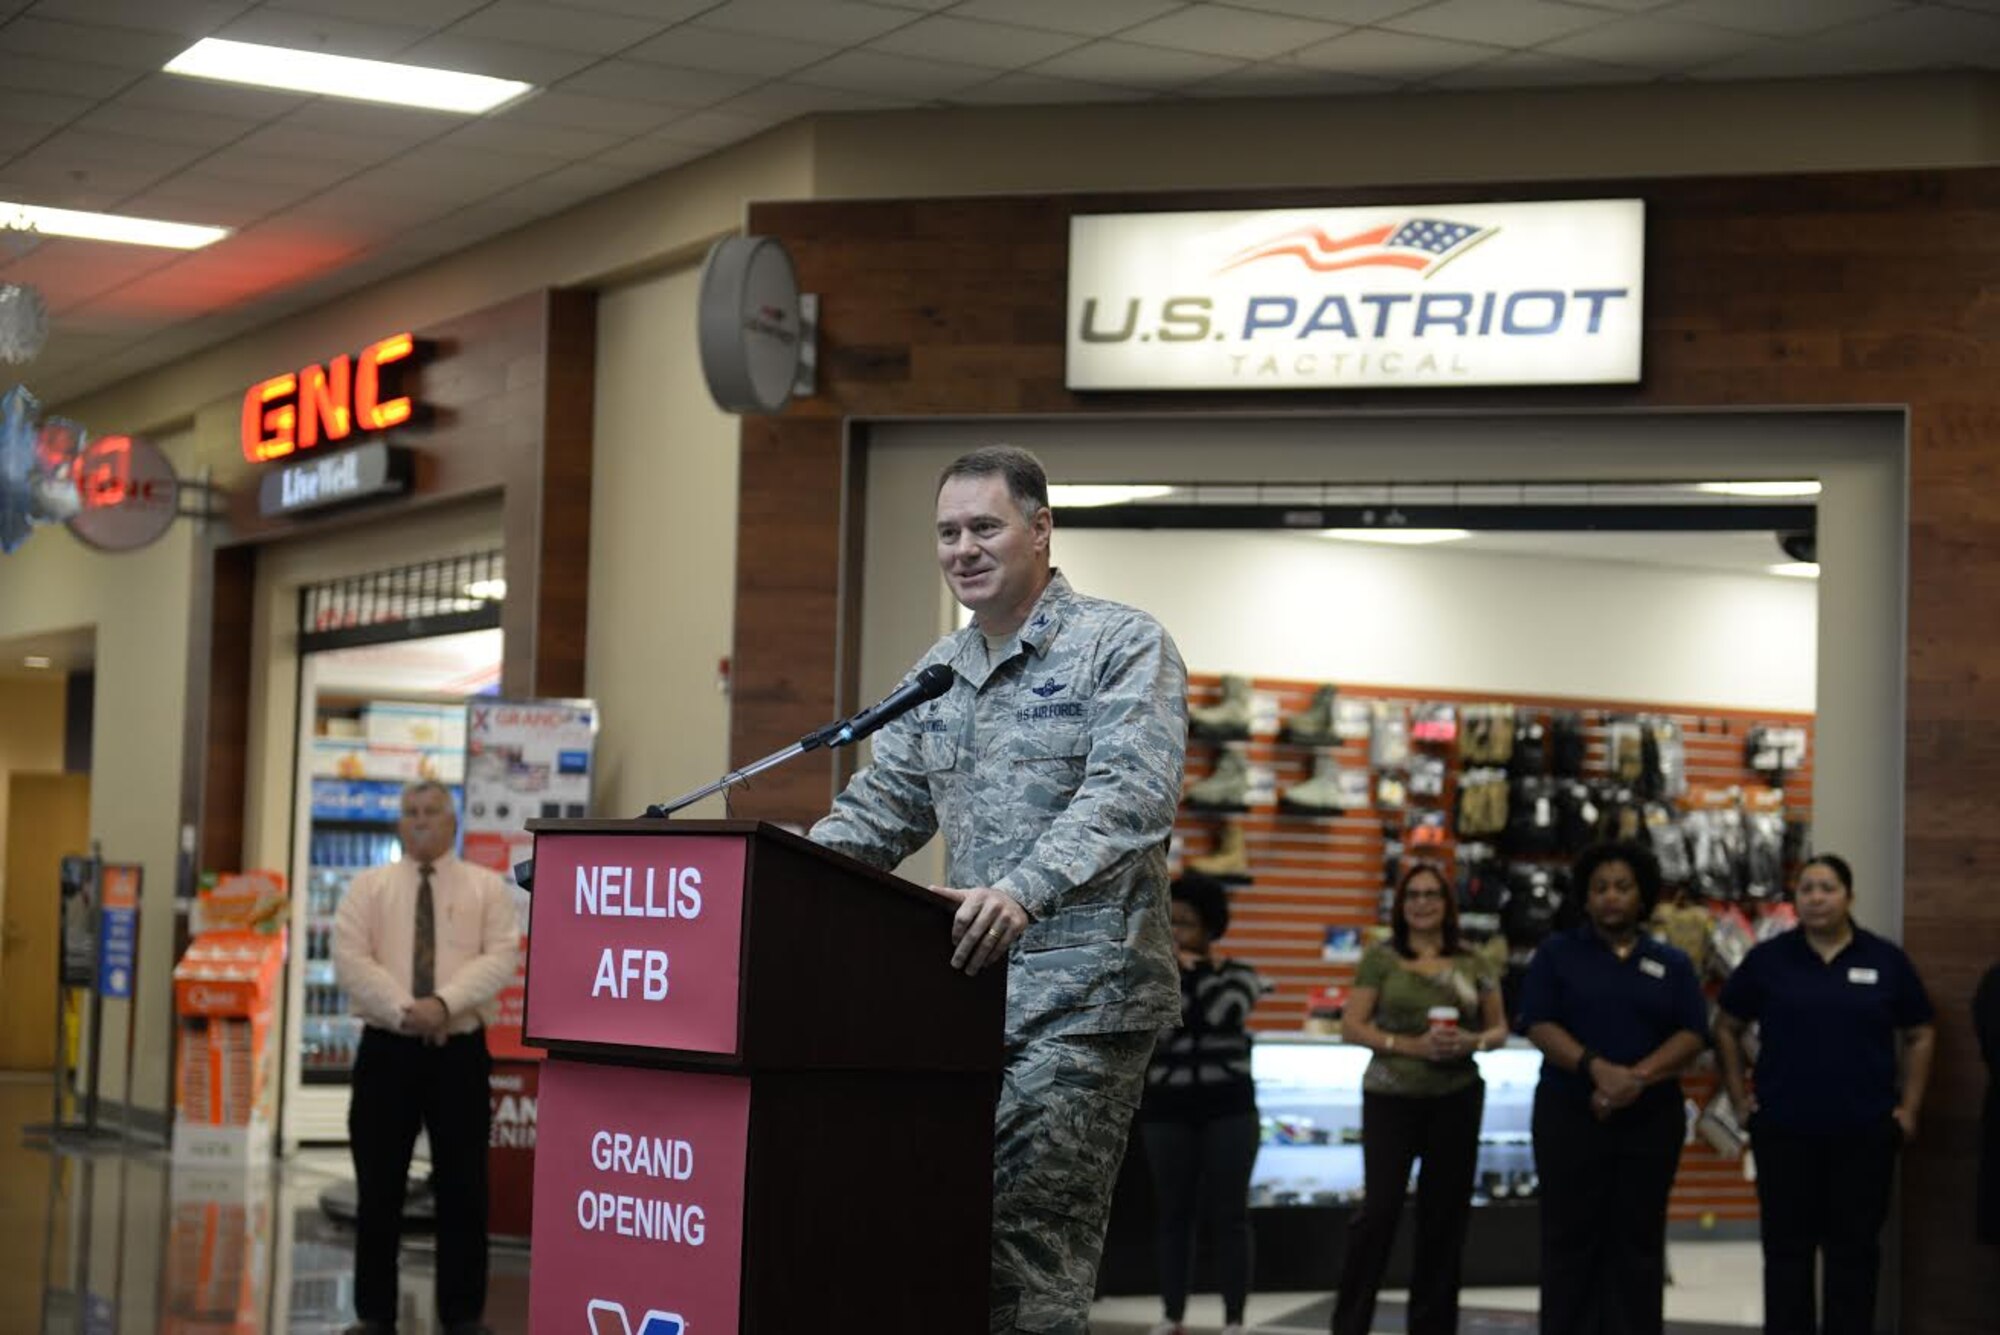 Col. Richard Boutwell, 99th Air Base Wing commander, gives opening remarks at the Exchange on Nellis Air Force Base, Nev., during the grand opening ceremony Nov. 10, 2015. The 221,800 square-foot shopping center experienced its first remodel in 13 years. It features updates to the main store as well as the food court and concessions. (U.S. Air Force photo by Airman 1st Class Rachel Loftis)